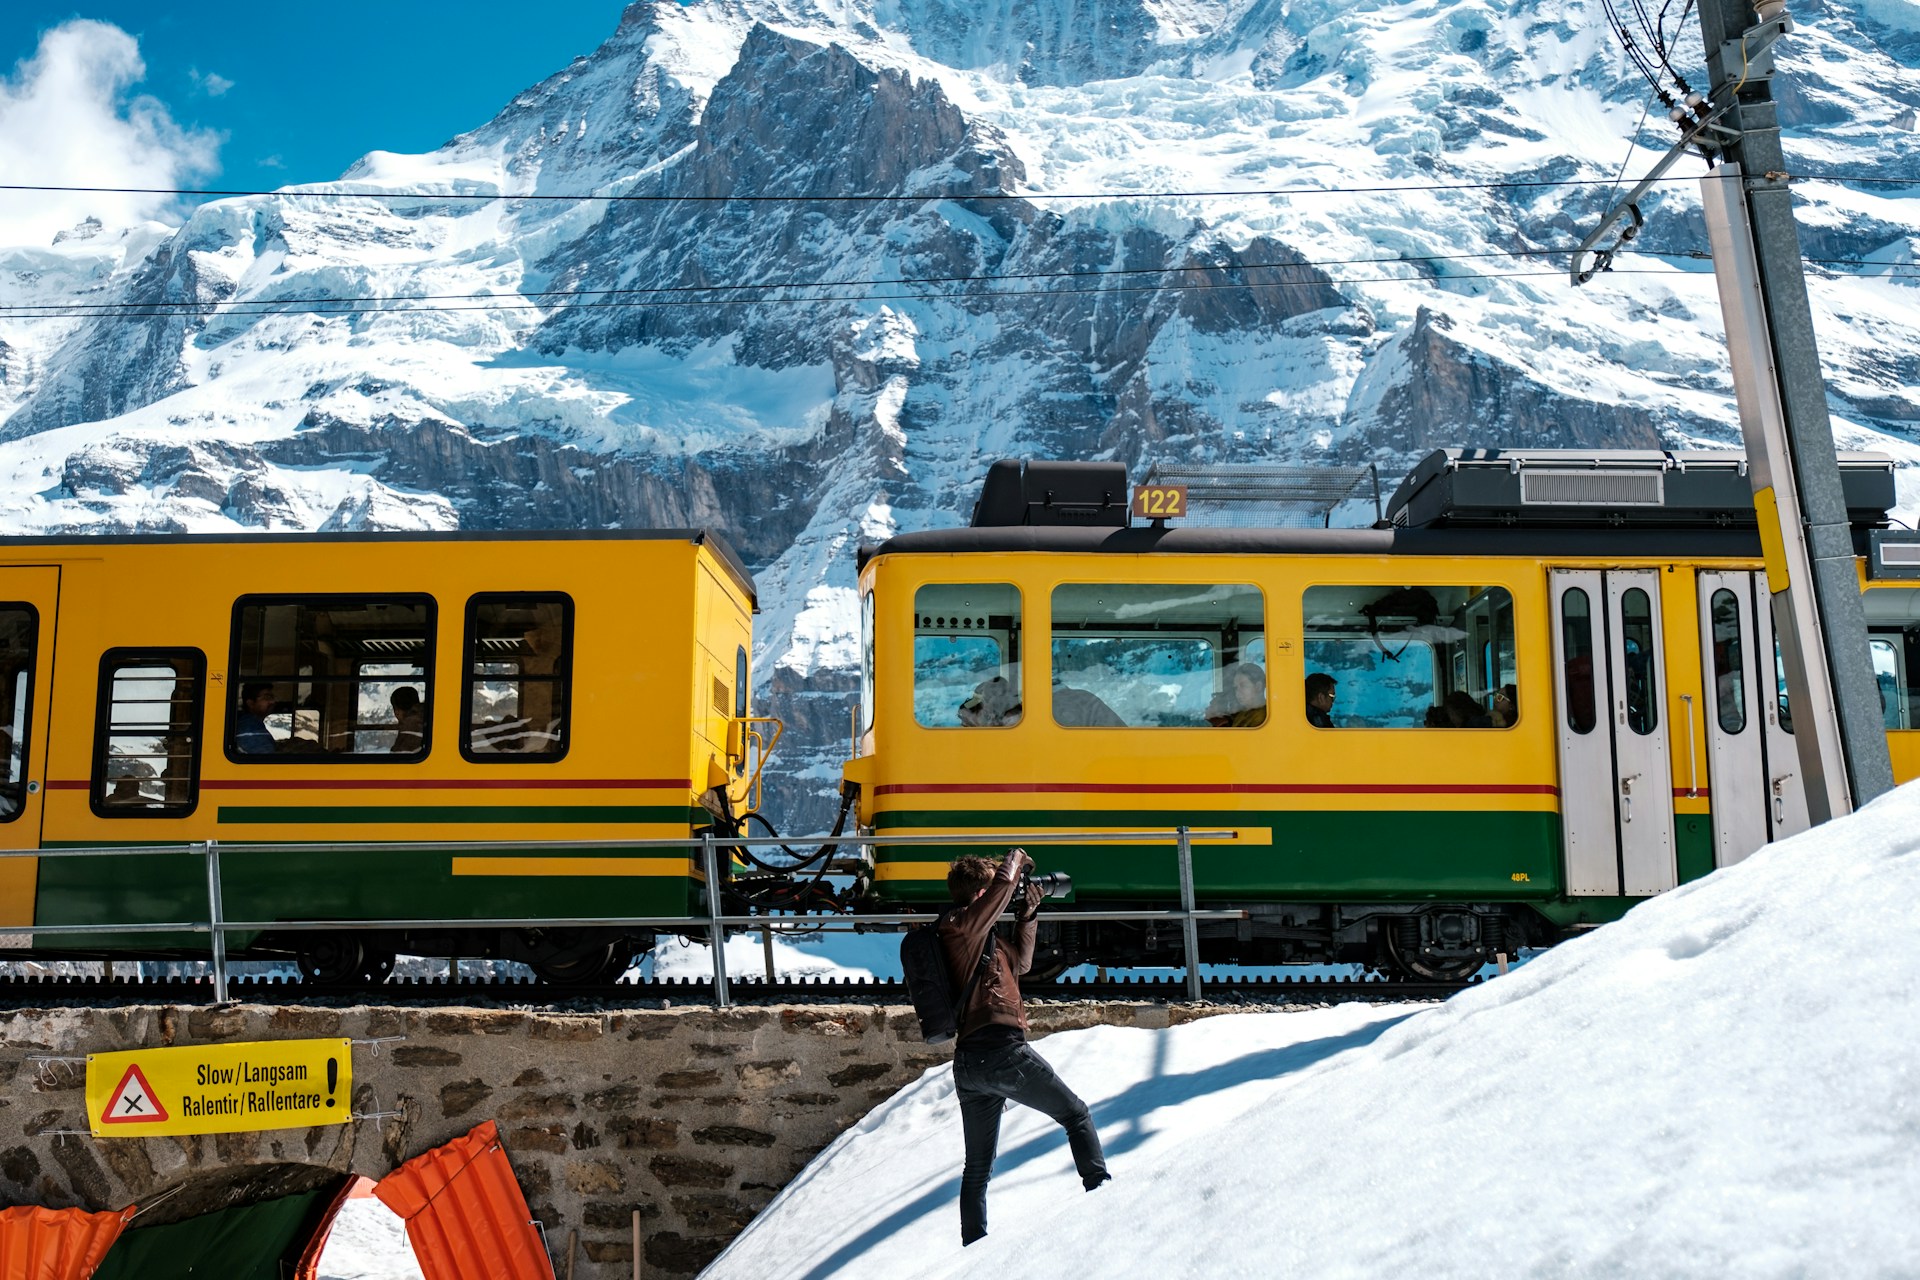 A photographer taking photos of the Jungfrau train. Side view of the train as it passes through the frame, mountains in the background